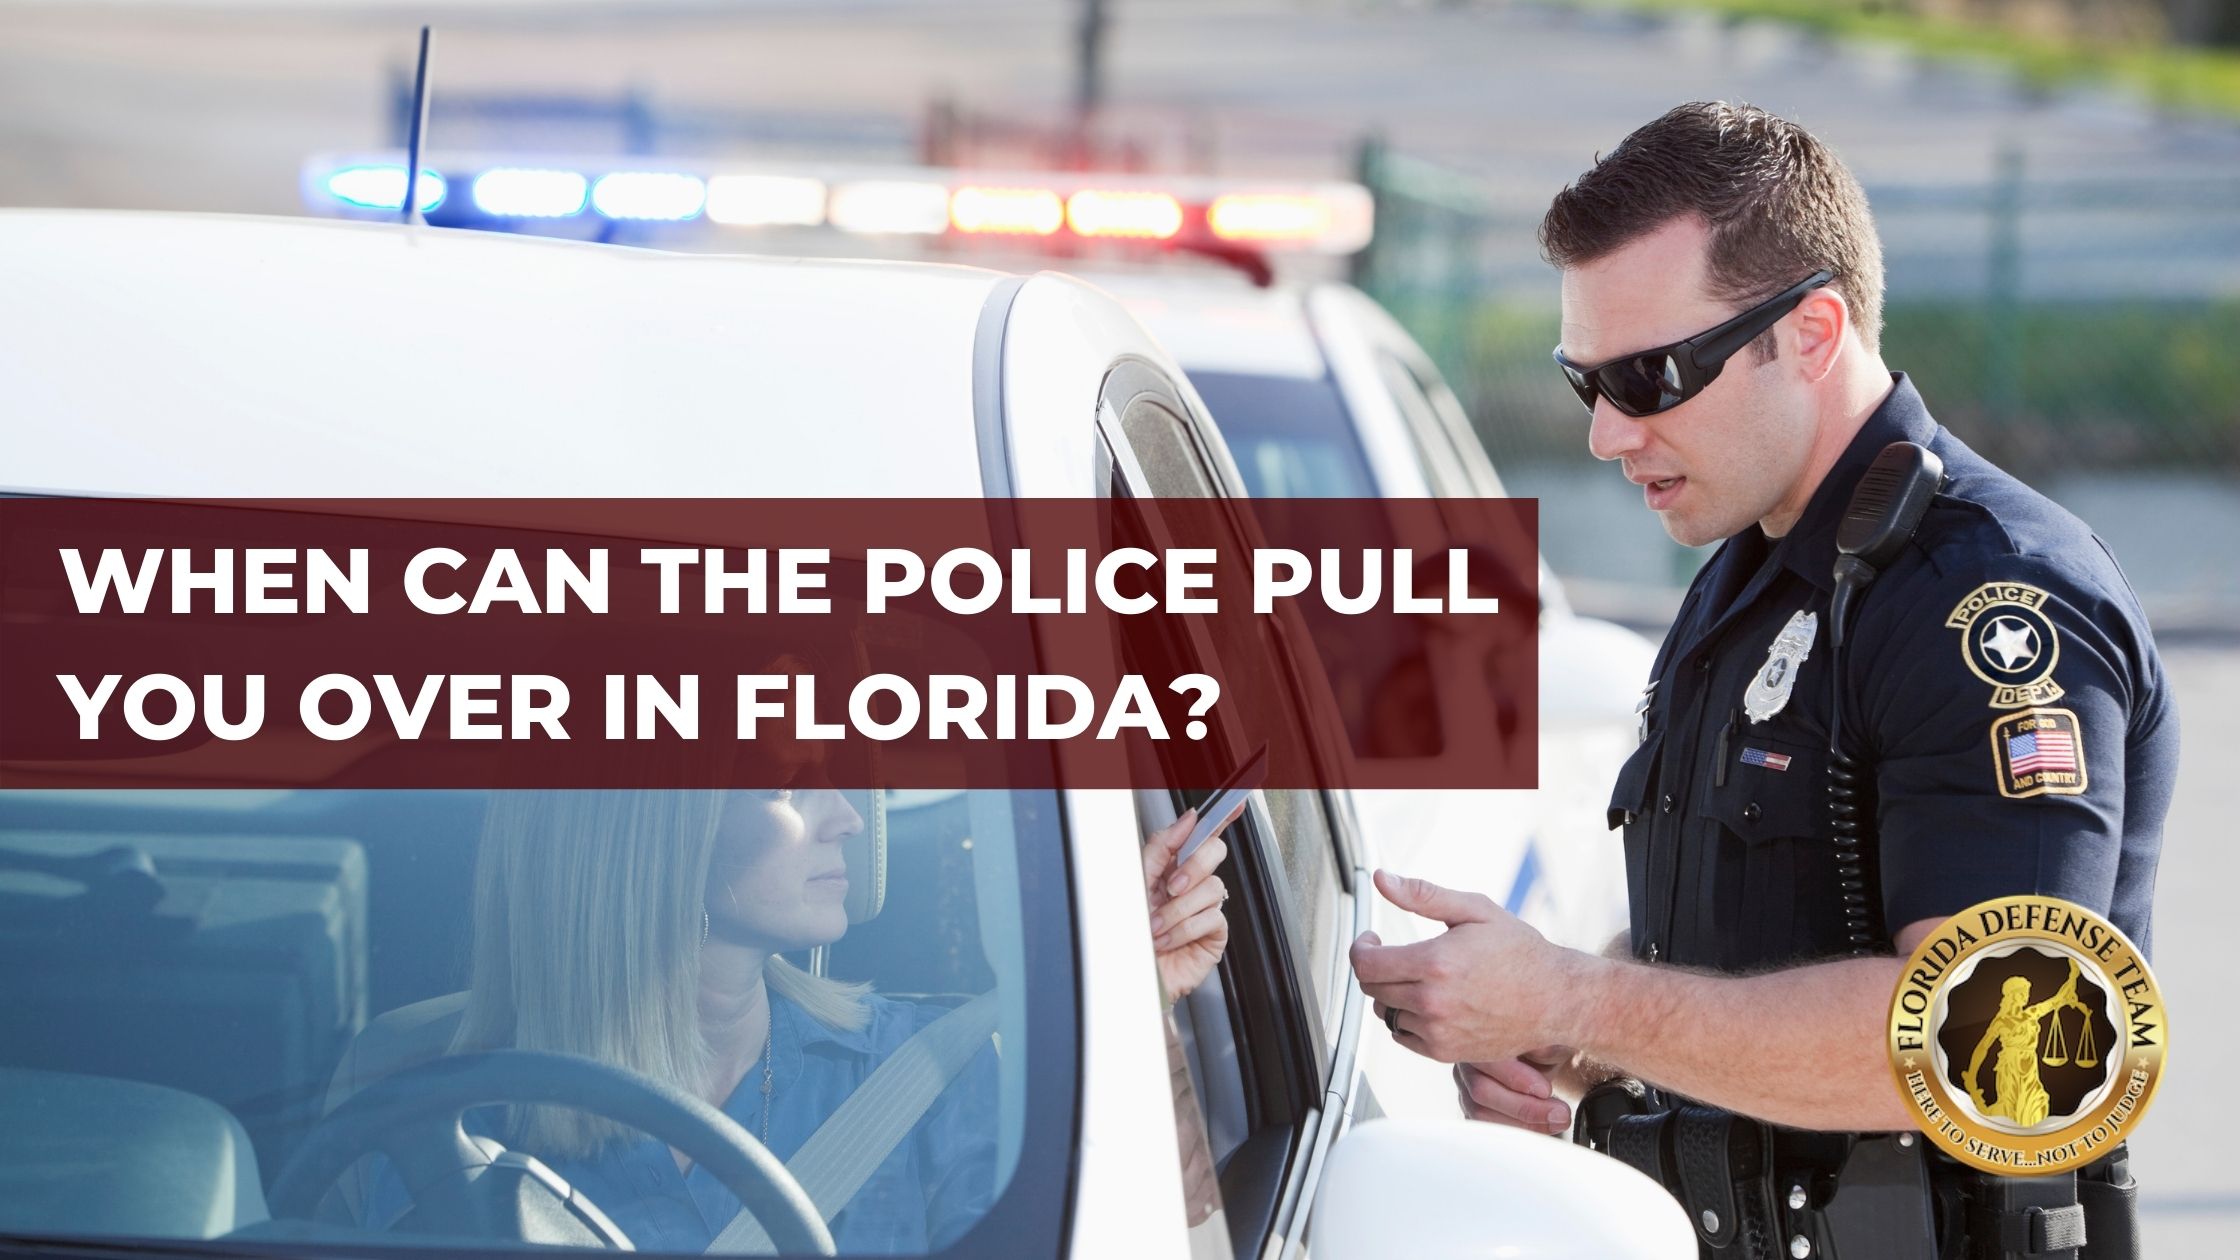 When Can the Police Pull You Over in Florida?